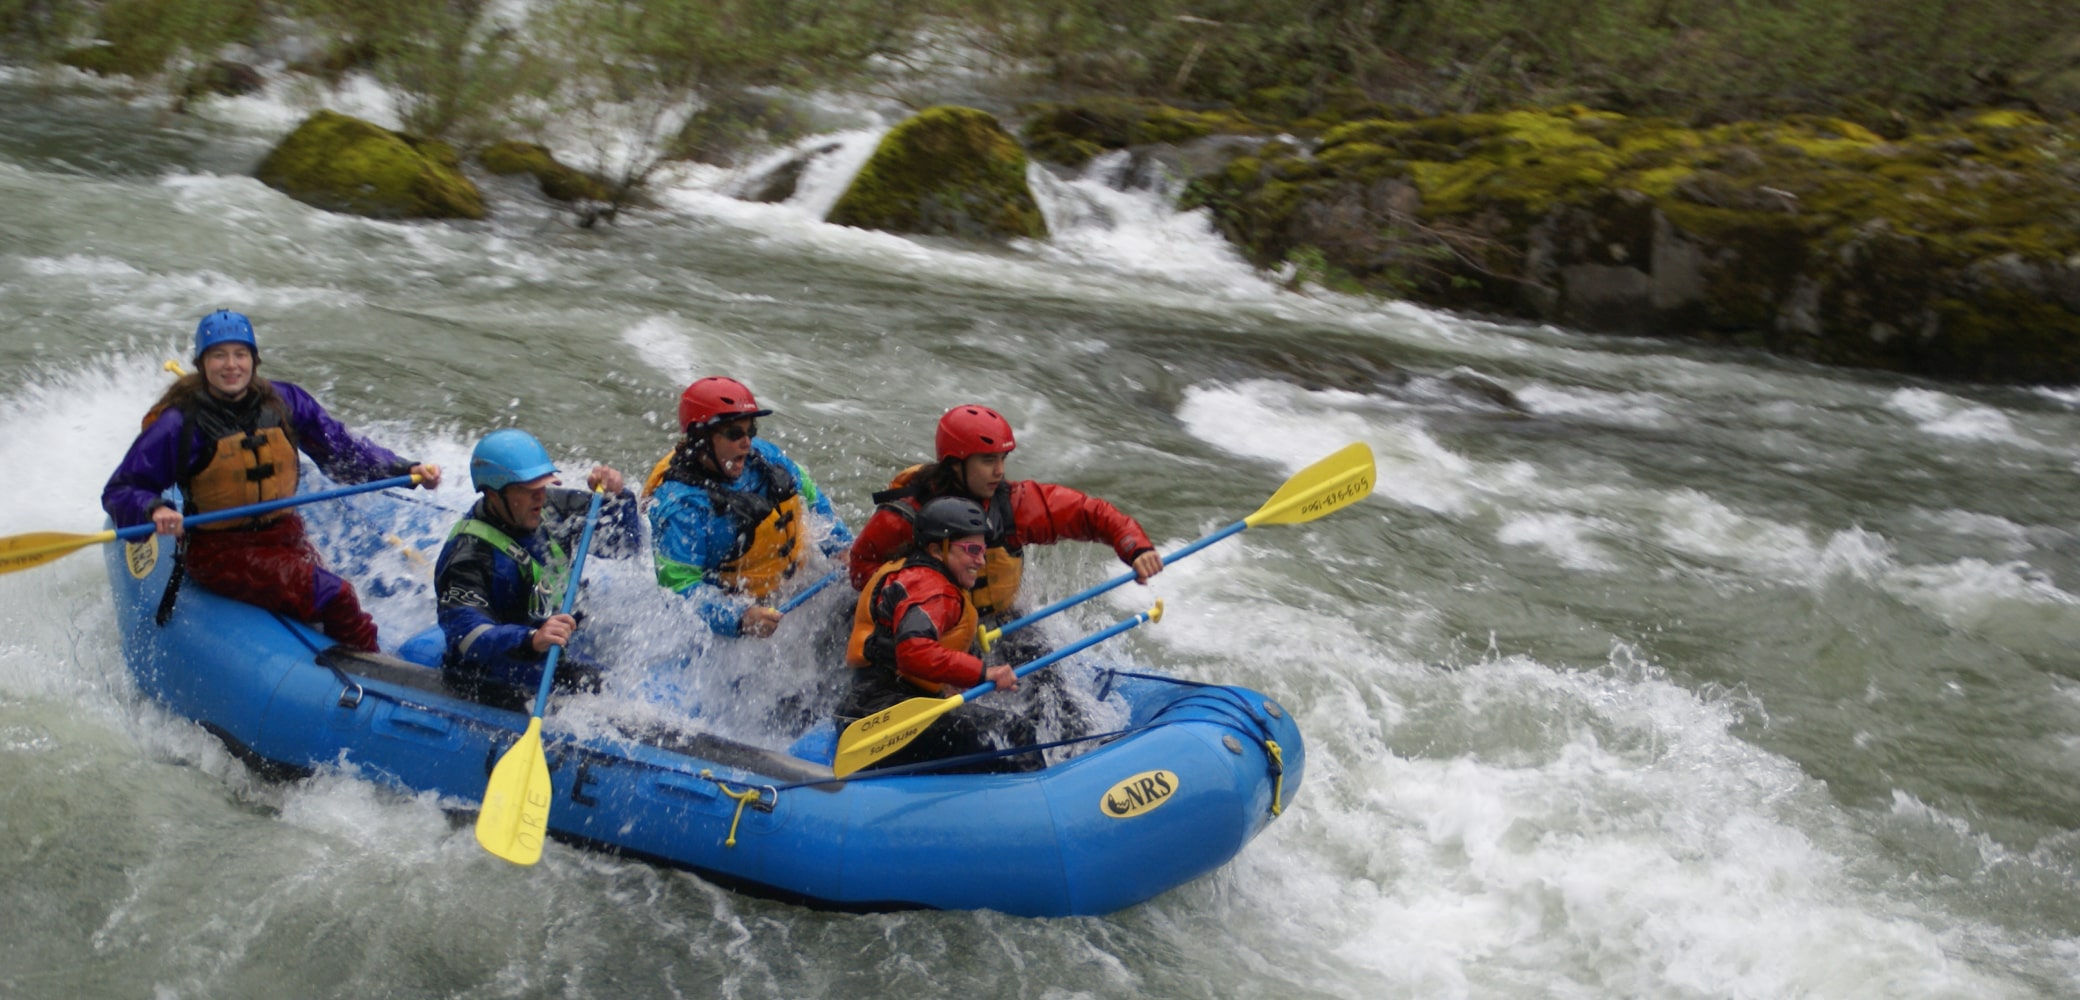 A group of 4 guided white water rafters paddle down river in Oregon